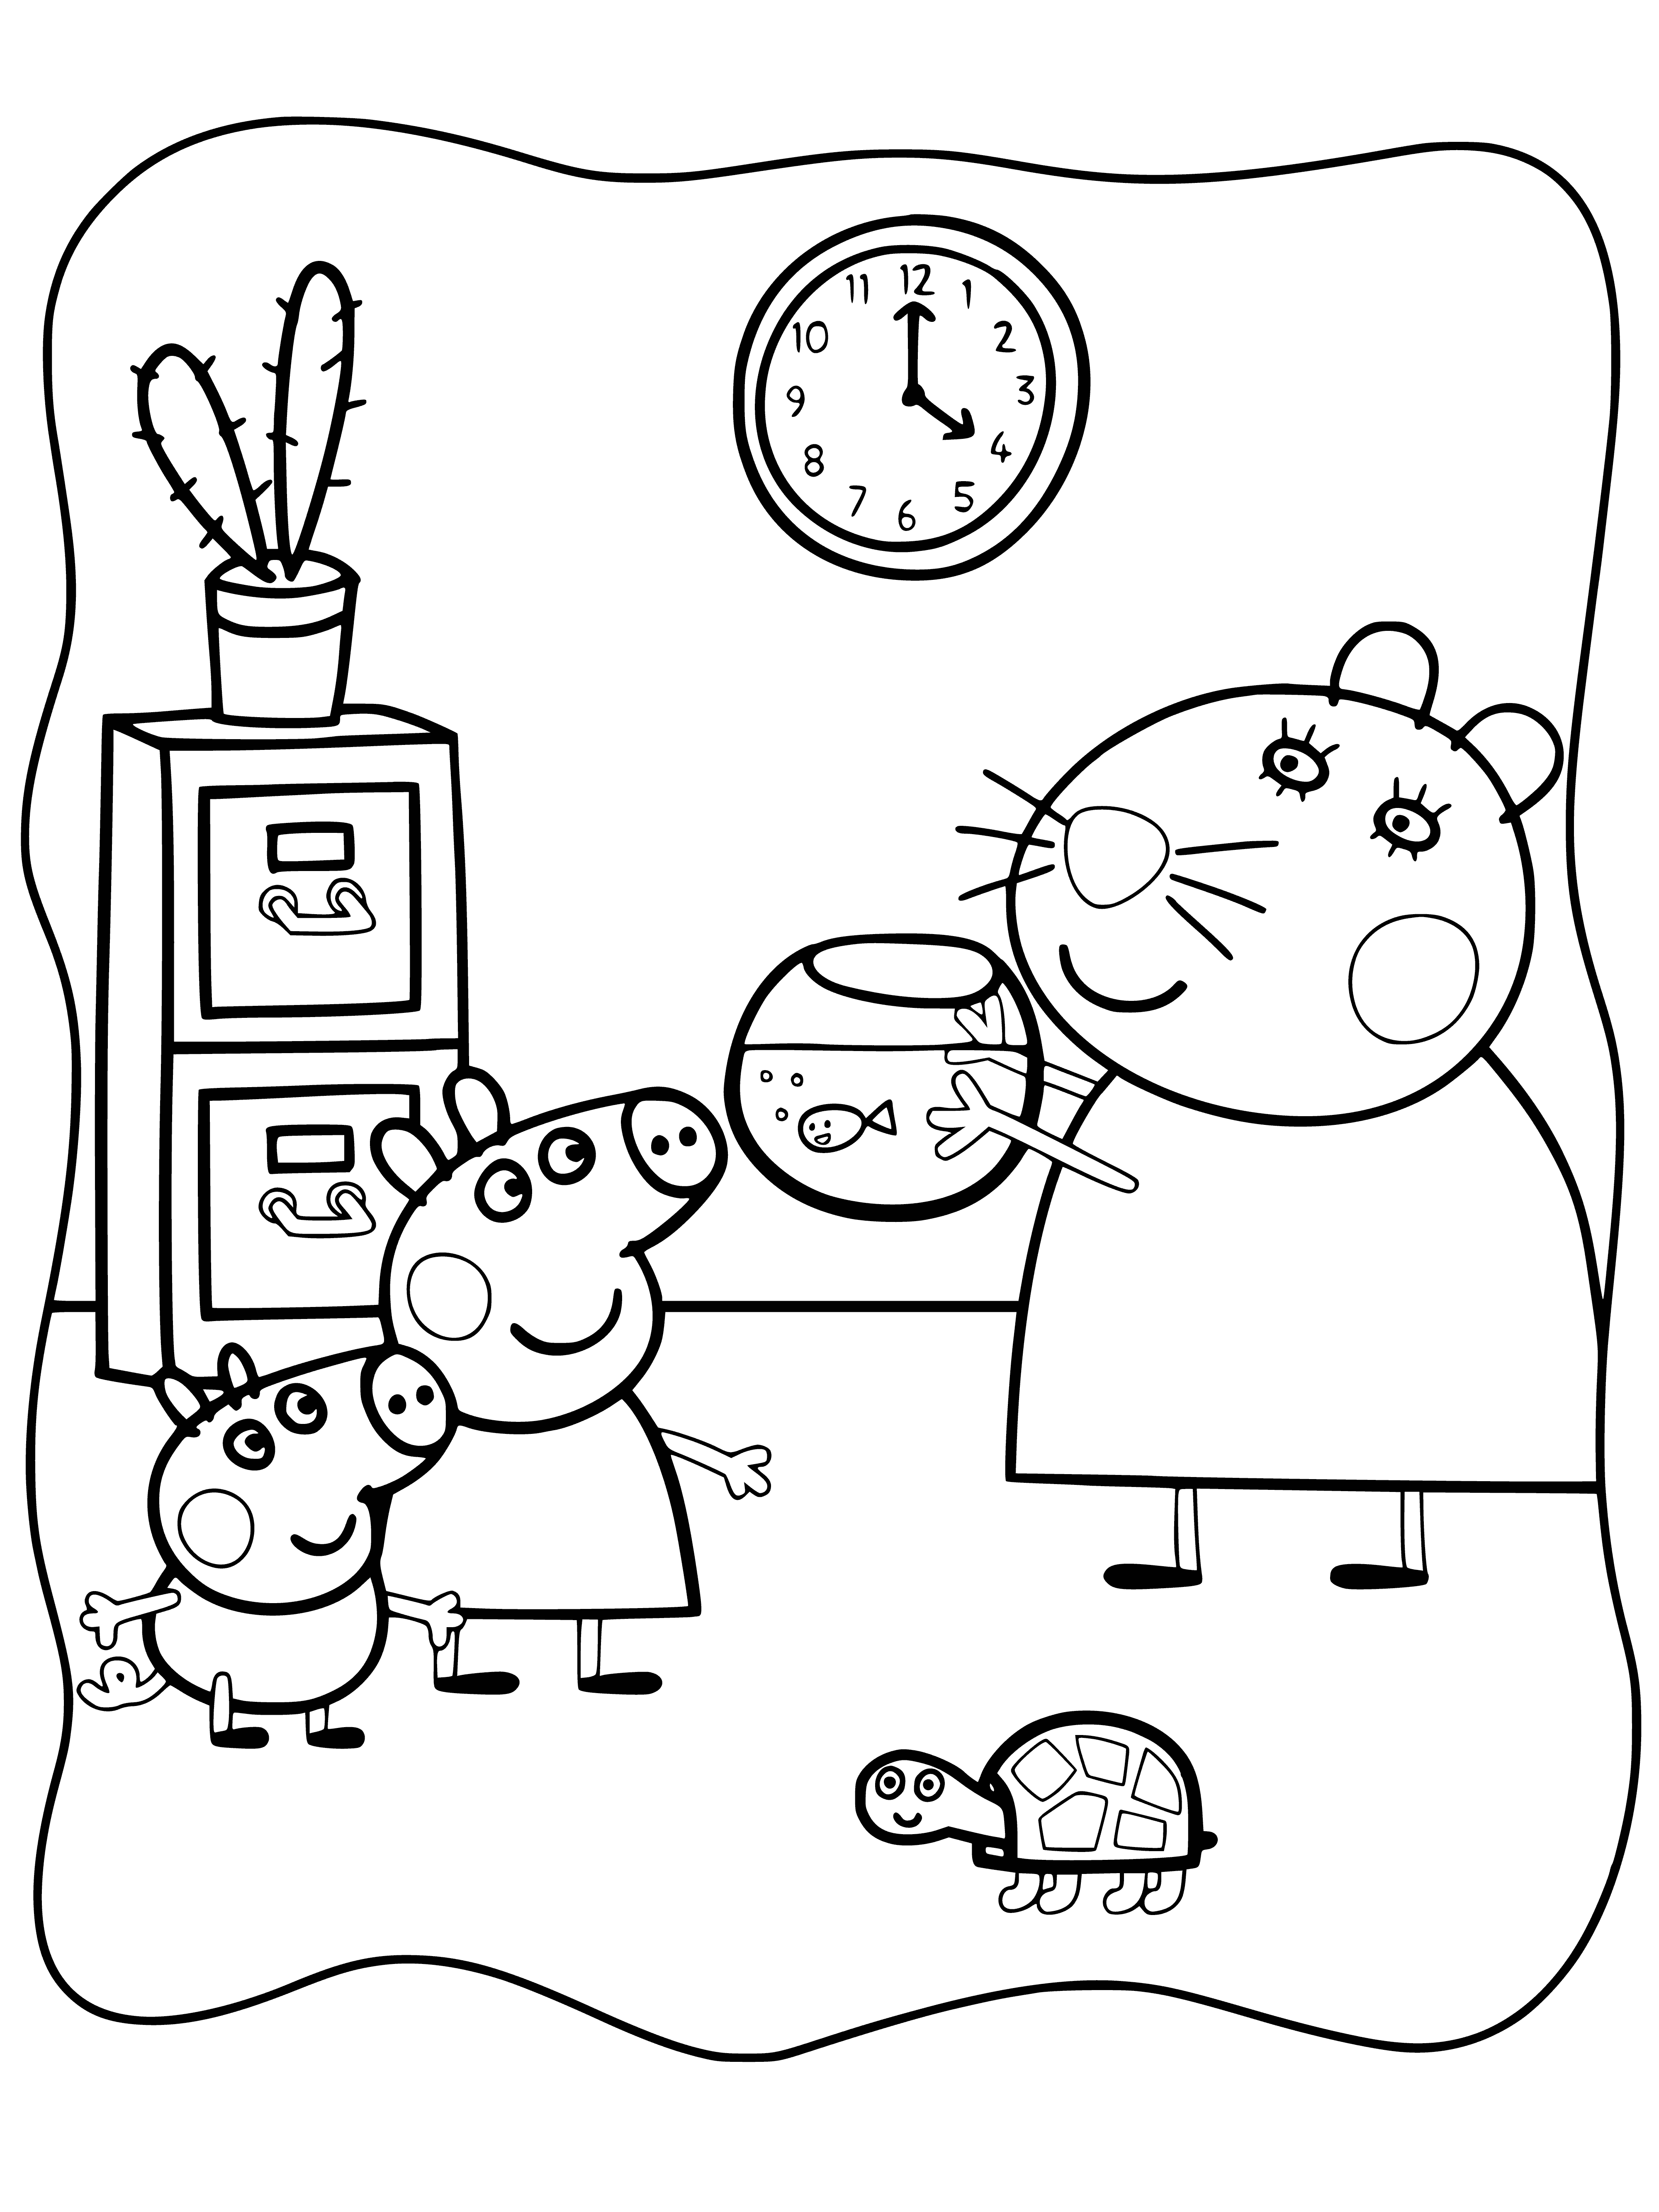 coloring page: A brown hamster in a white coat and stethoscope sits on a purple chair, with a blue book on the floor, while Peppa Pig in a pink dress stands next to it.